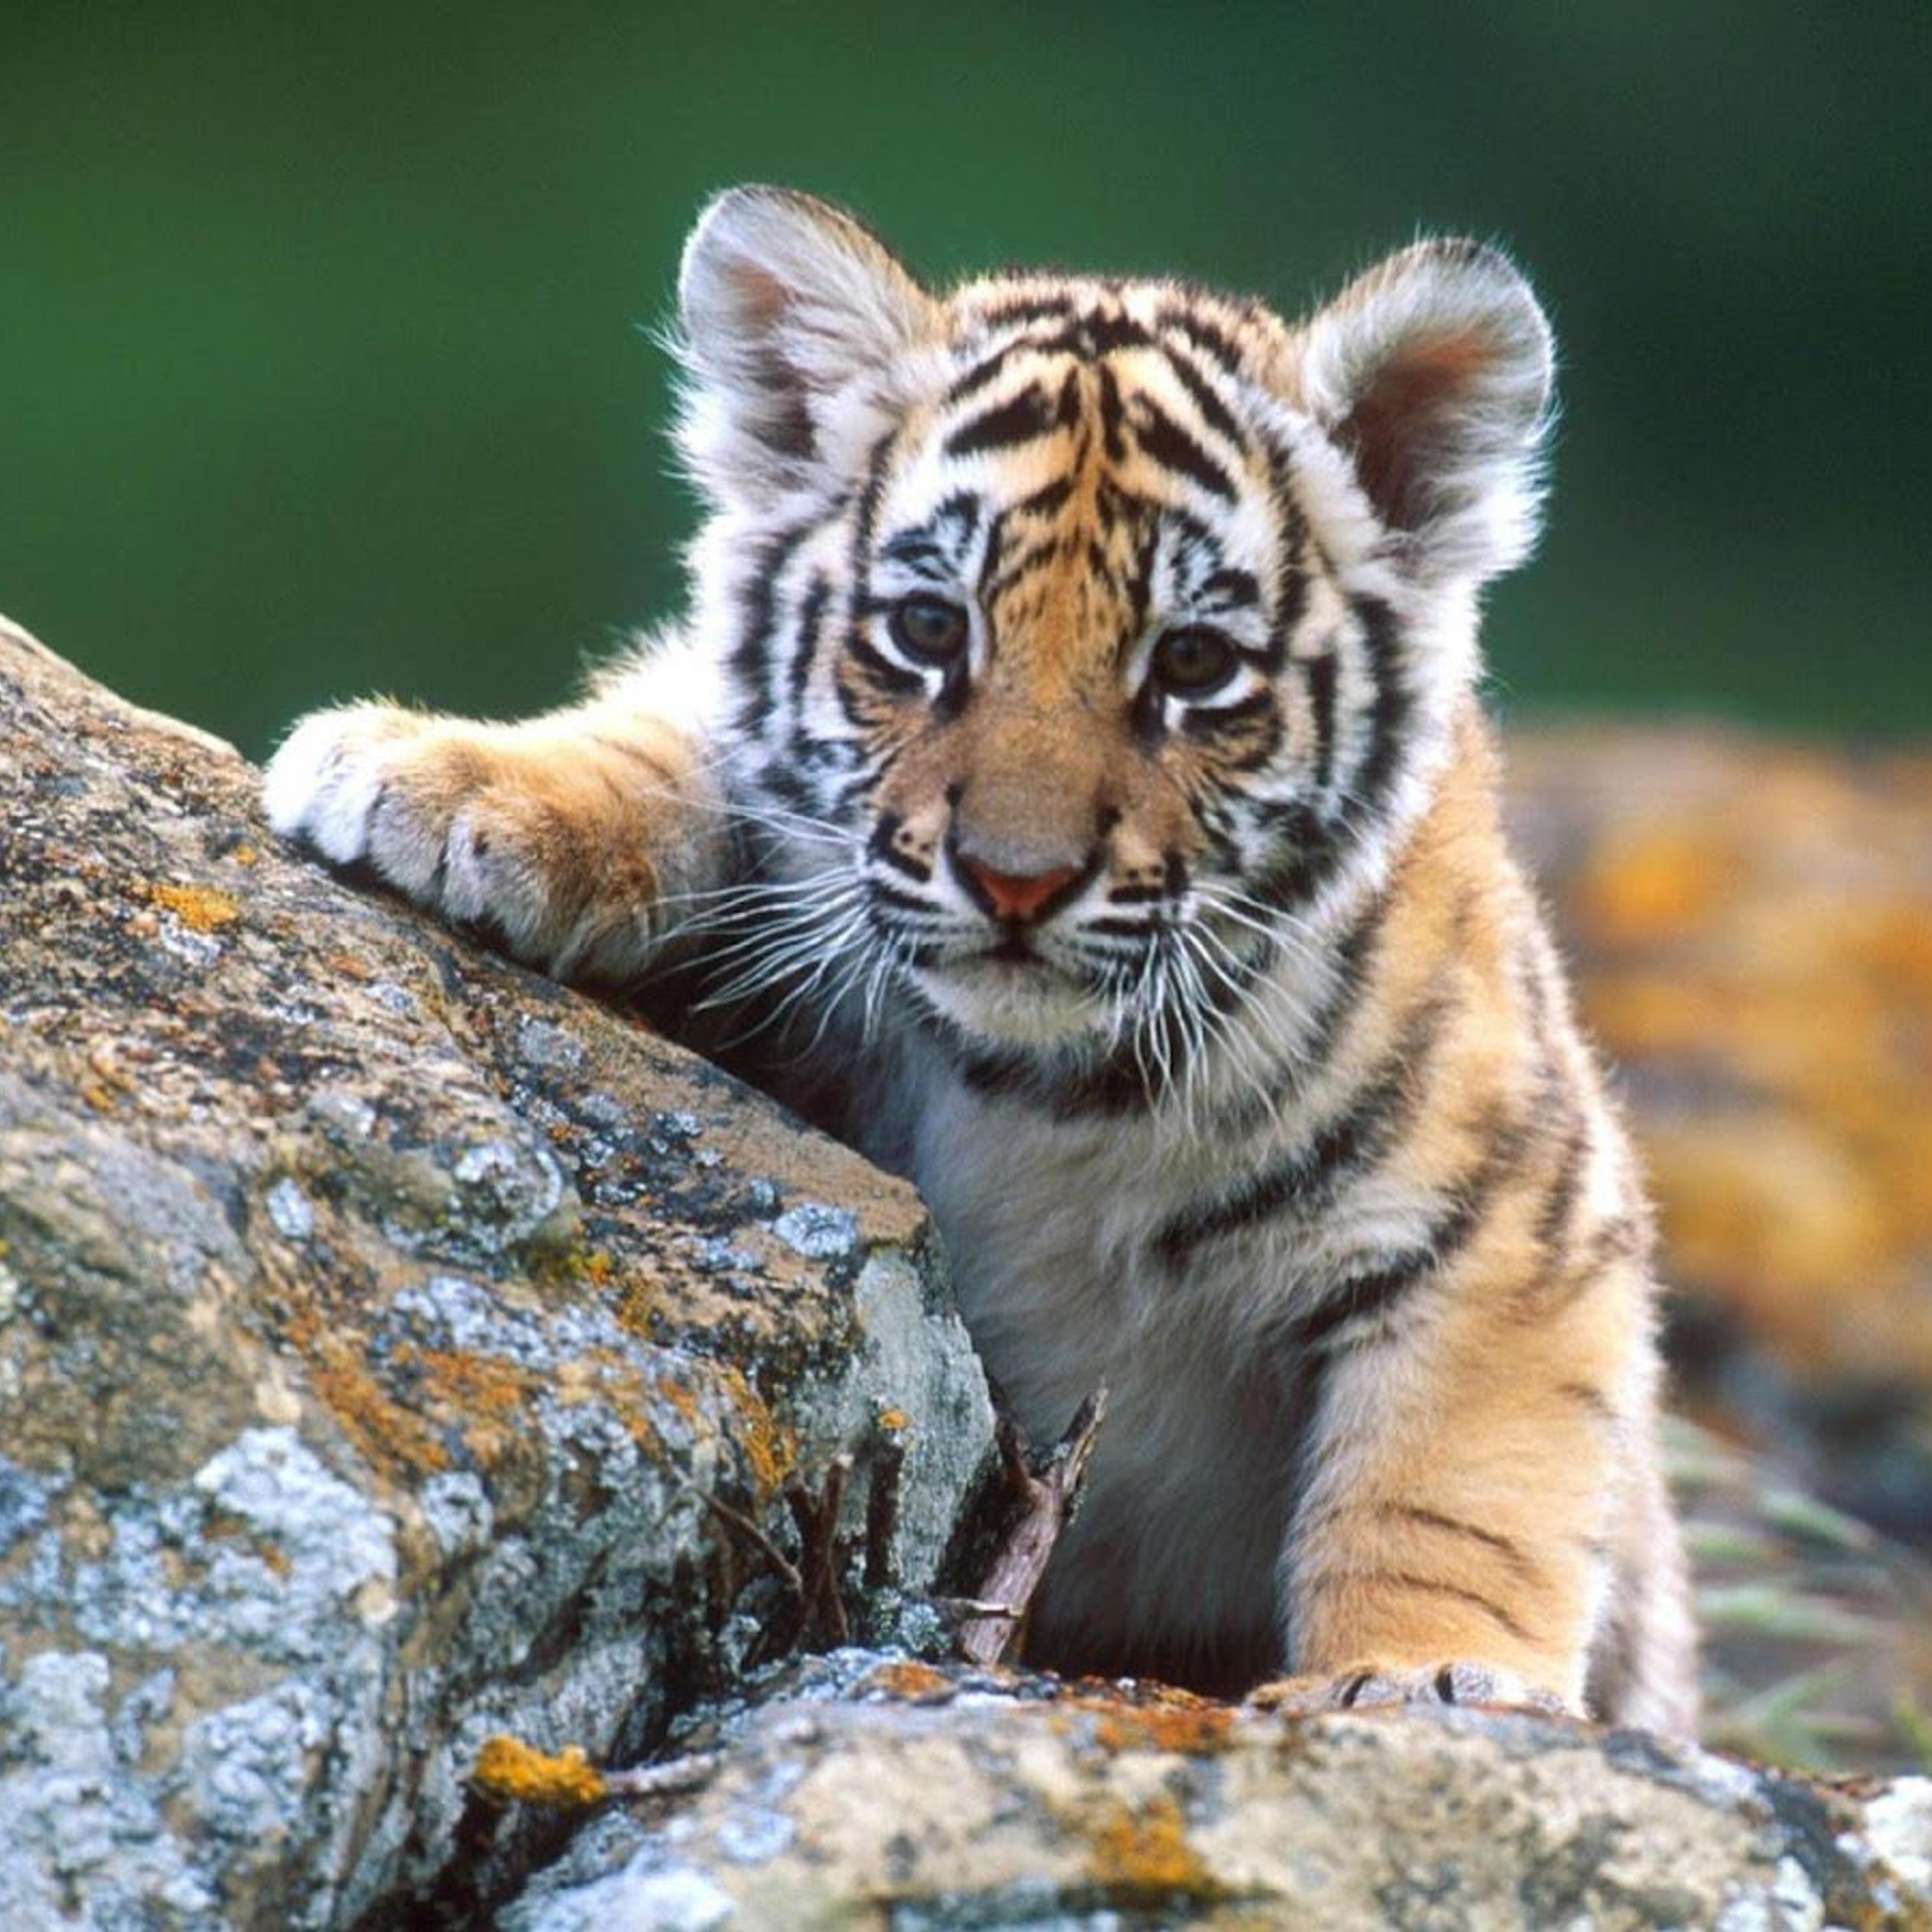 Sweet little tiger in the jungle - HD wallpaper wild animals